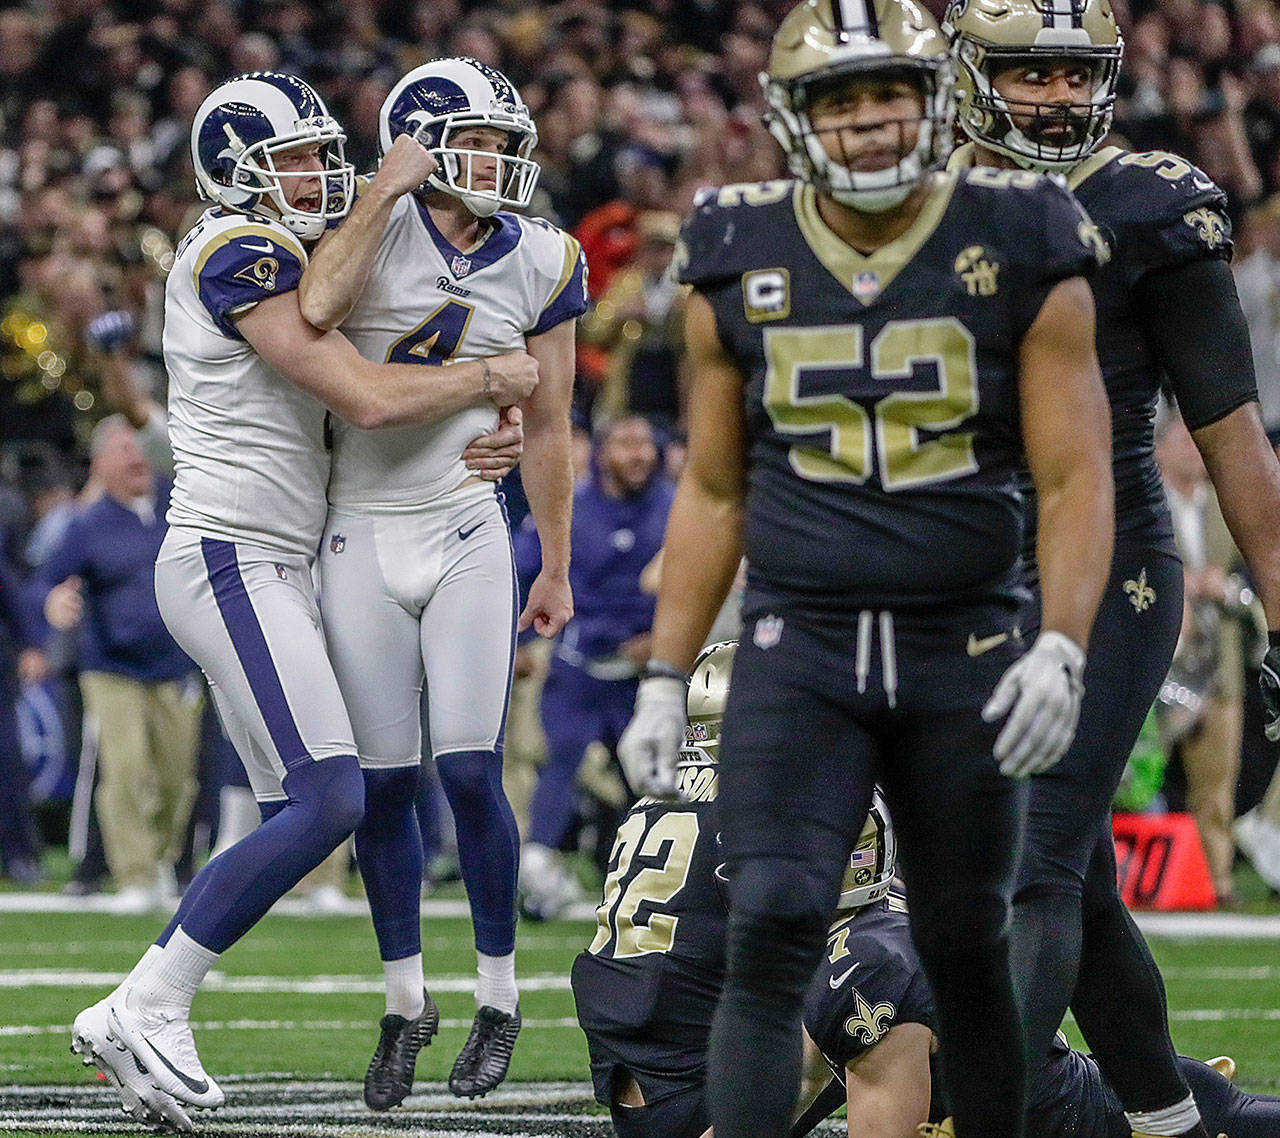 Los Angeles Rams kicker Greg Zuerlein is lifted by teammate Johnny Hekker after hitting a 57-yard field goal in overtime to beat the New Orleans Saints 26-23 in the NFC Championship game on Sunday, Jan. 20, 2019 at the Superdome in New Orleans, La. (Robert Gauthier/Los Angeles Times/TNS)